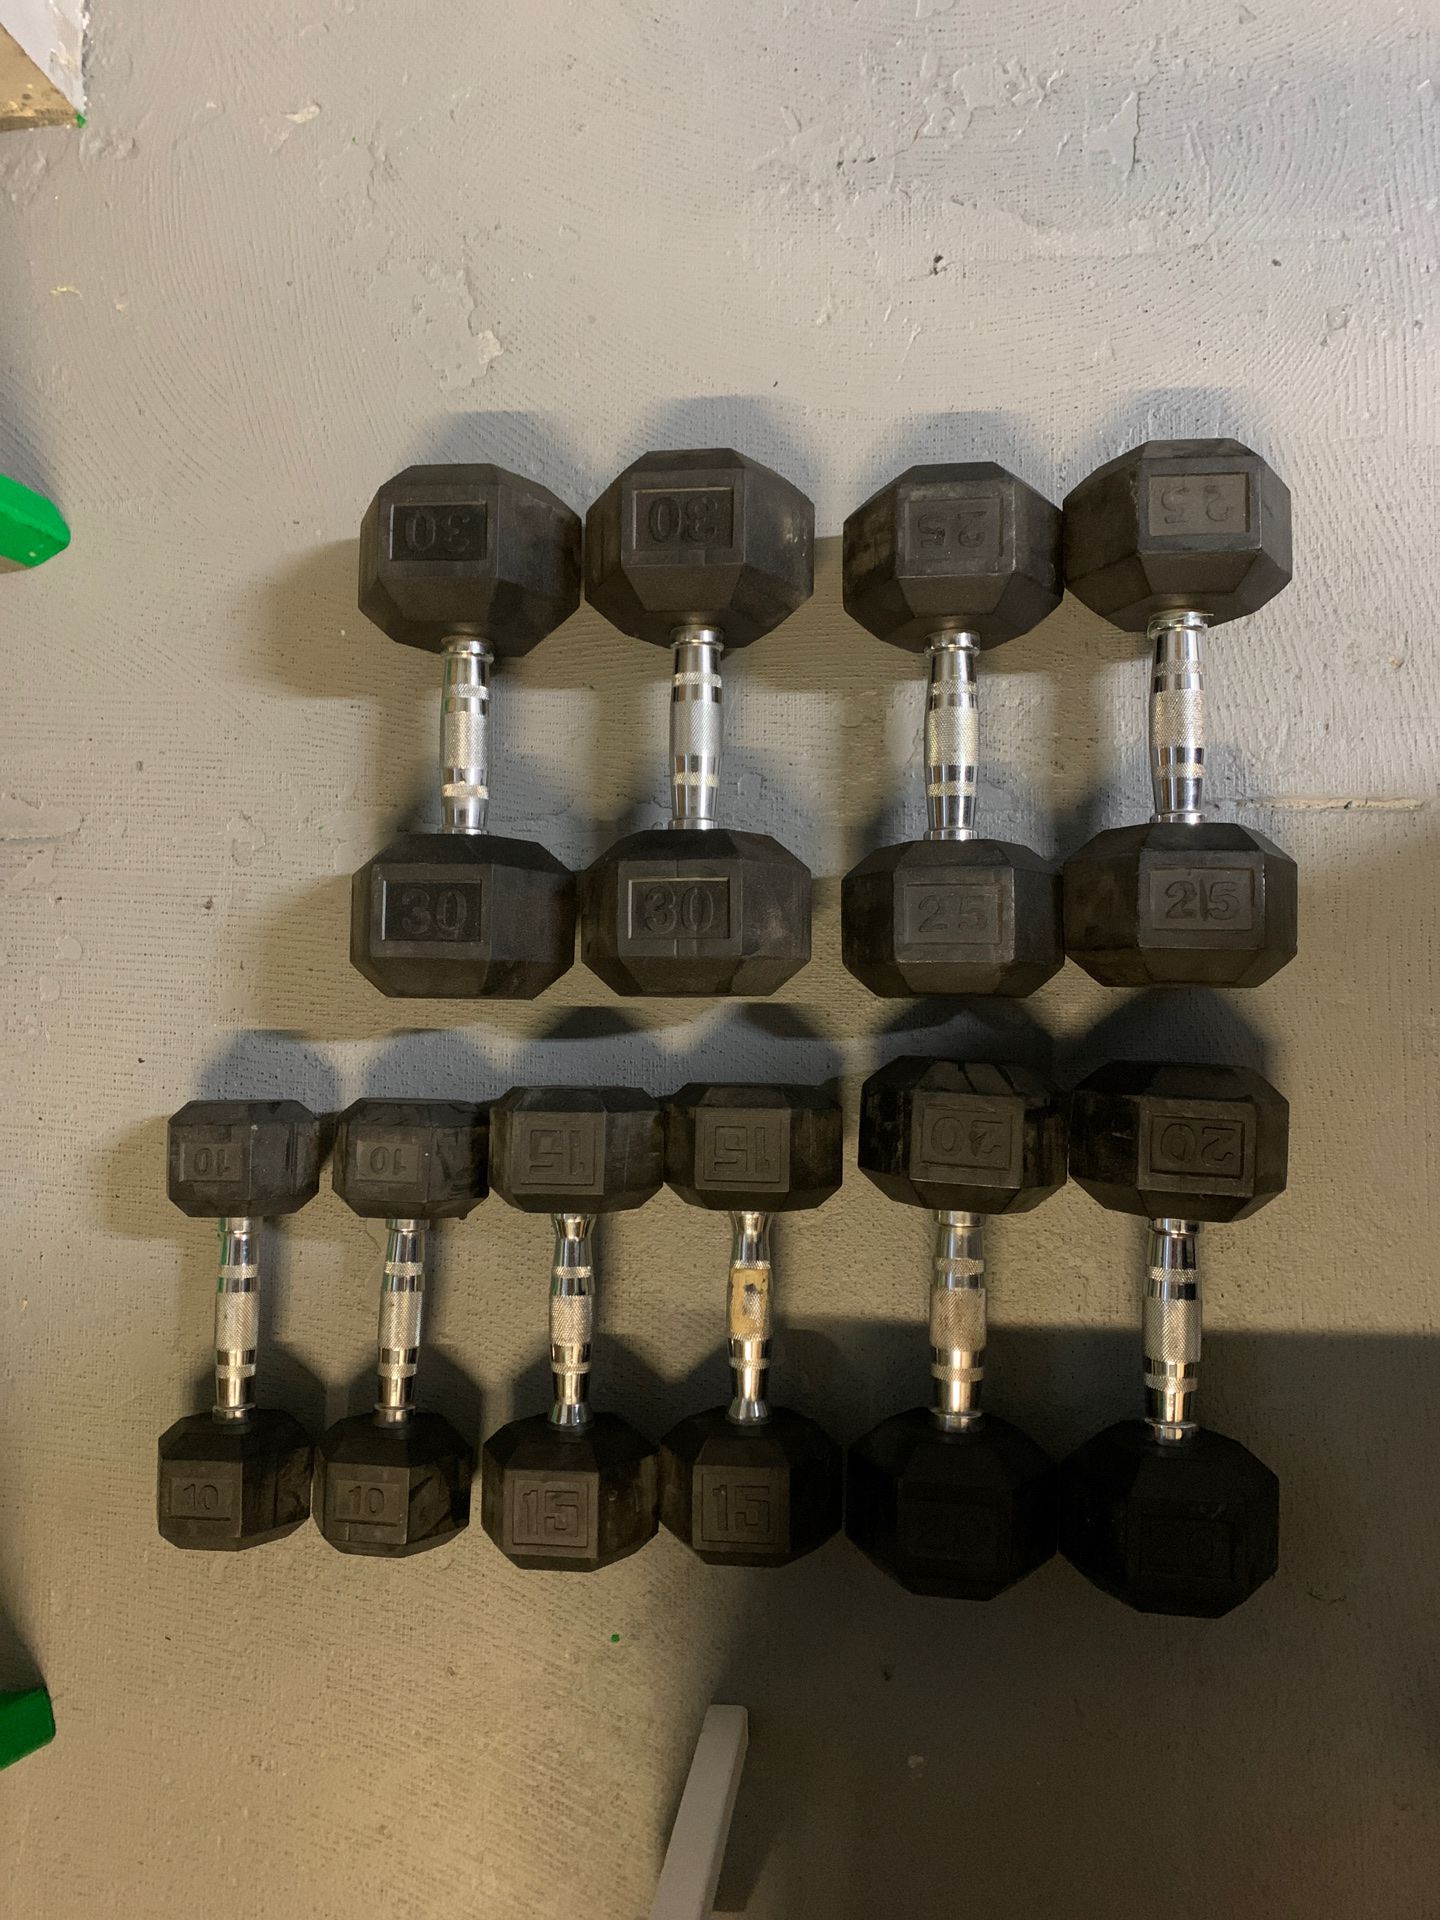 Dumbbells WEIGHTS for sale -30, 25,20,15,10 sets of each